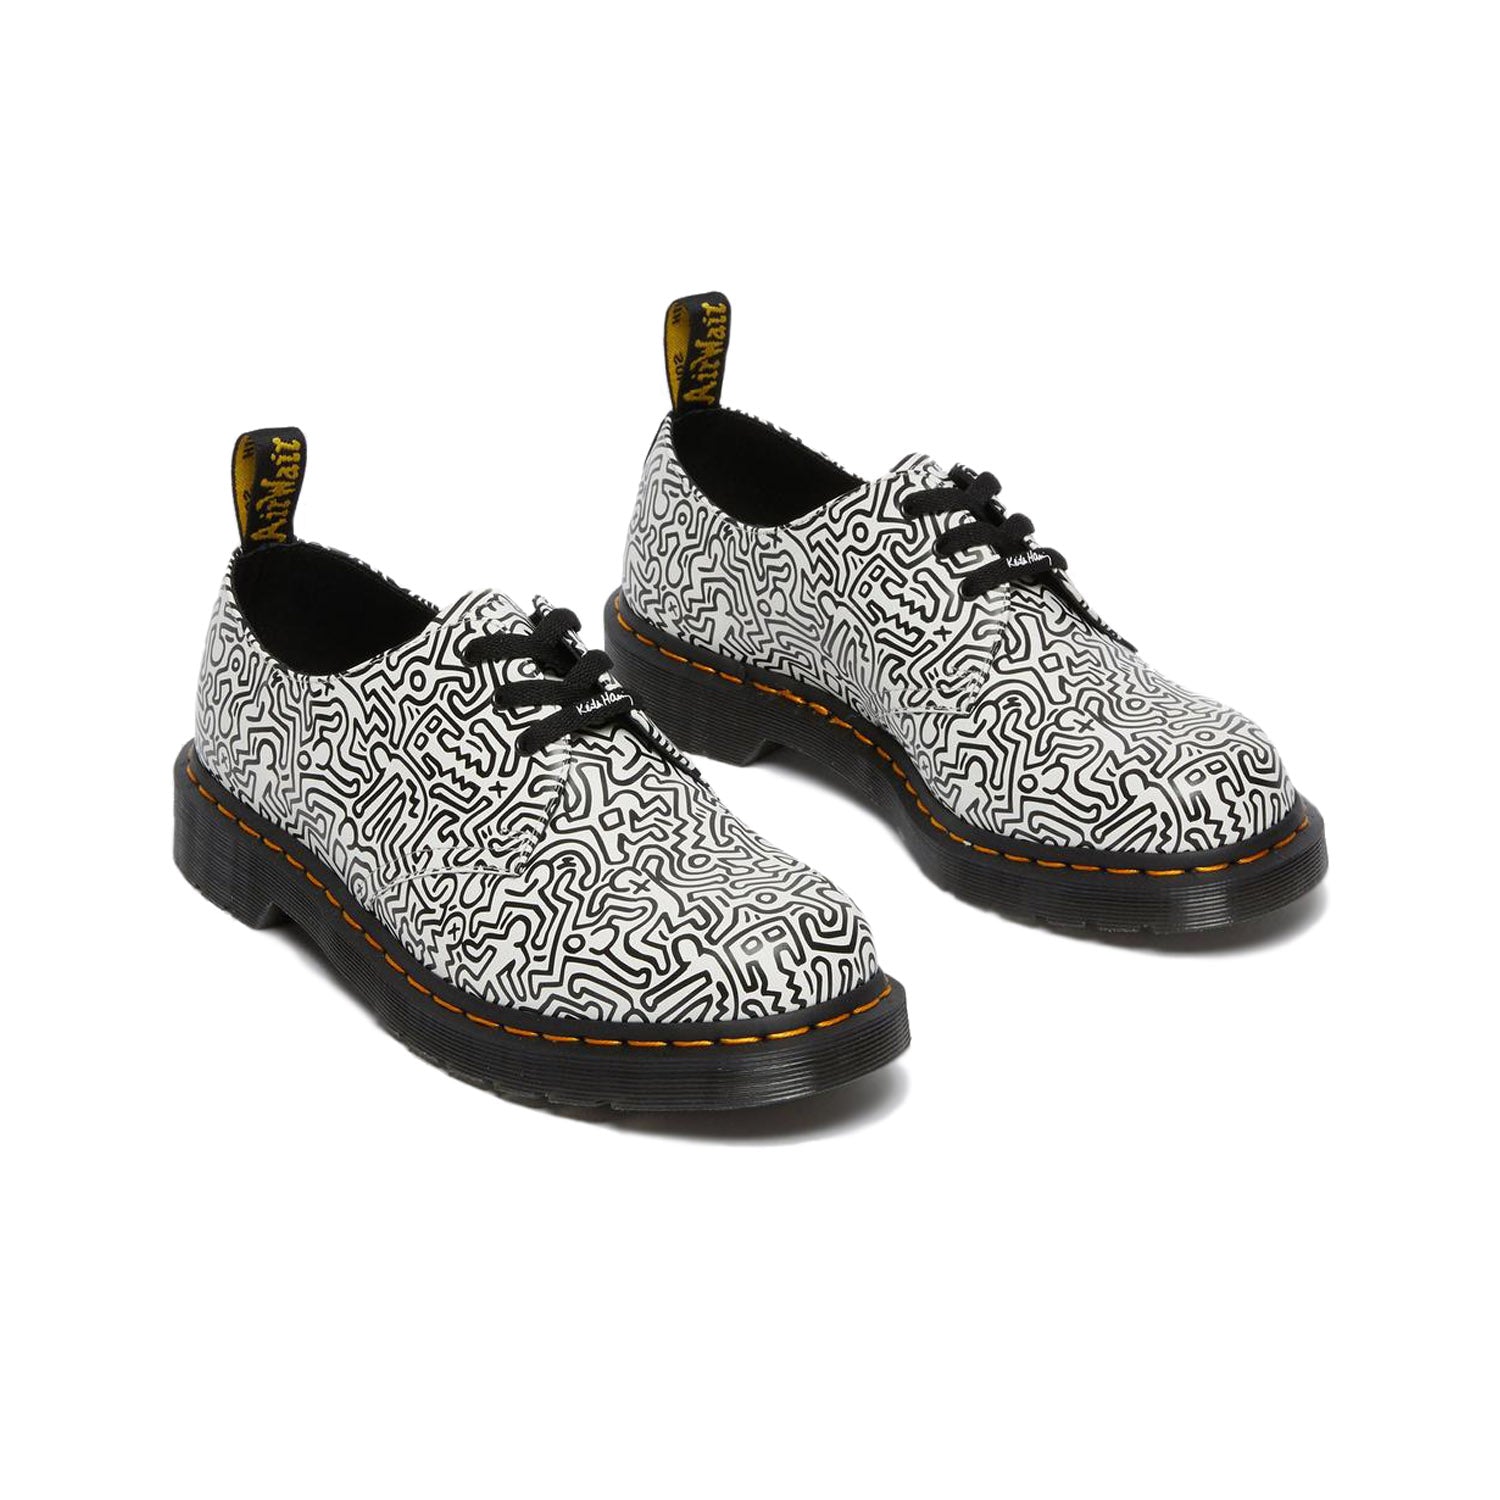 Dr. Martens 1461 Keith Haring Black and White Printed Leather Shoes